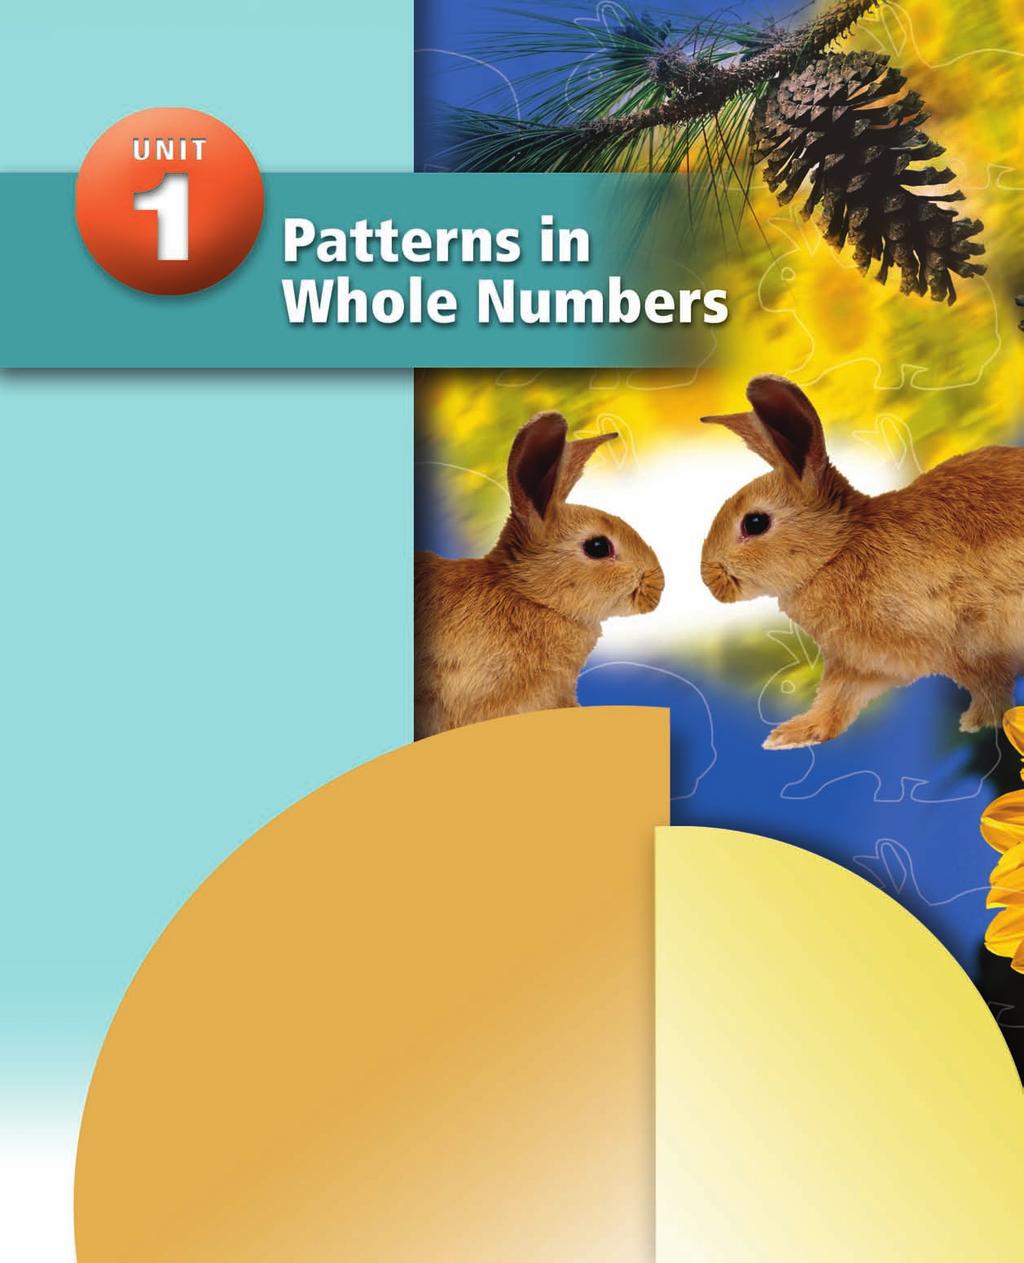 There are many patterns you can see in nature. You can use numbers to describe many of these patterns. At the end of this unit, you will investigate a famous set of numbers, the Fibonacci Numbers.